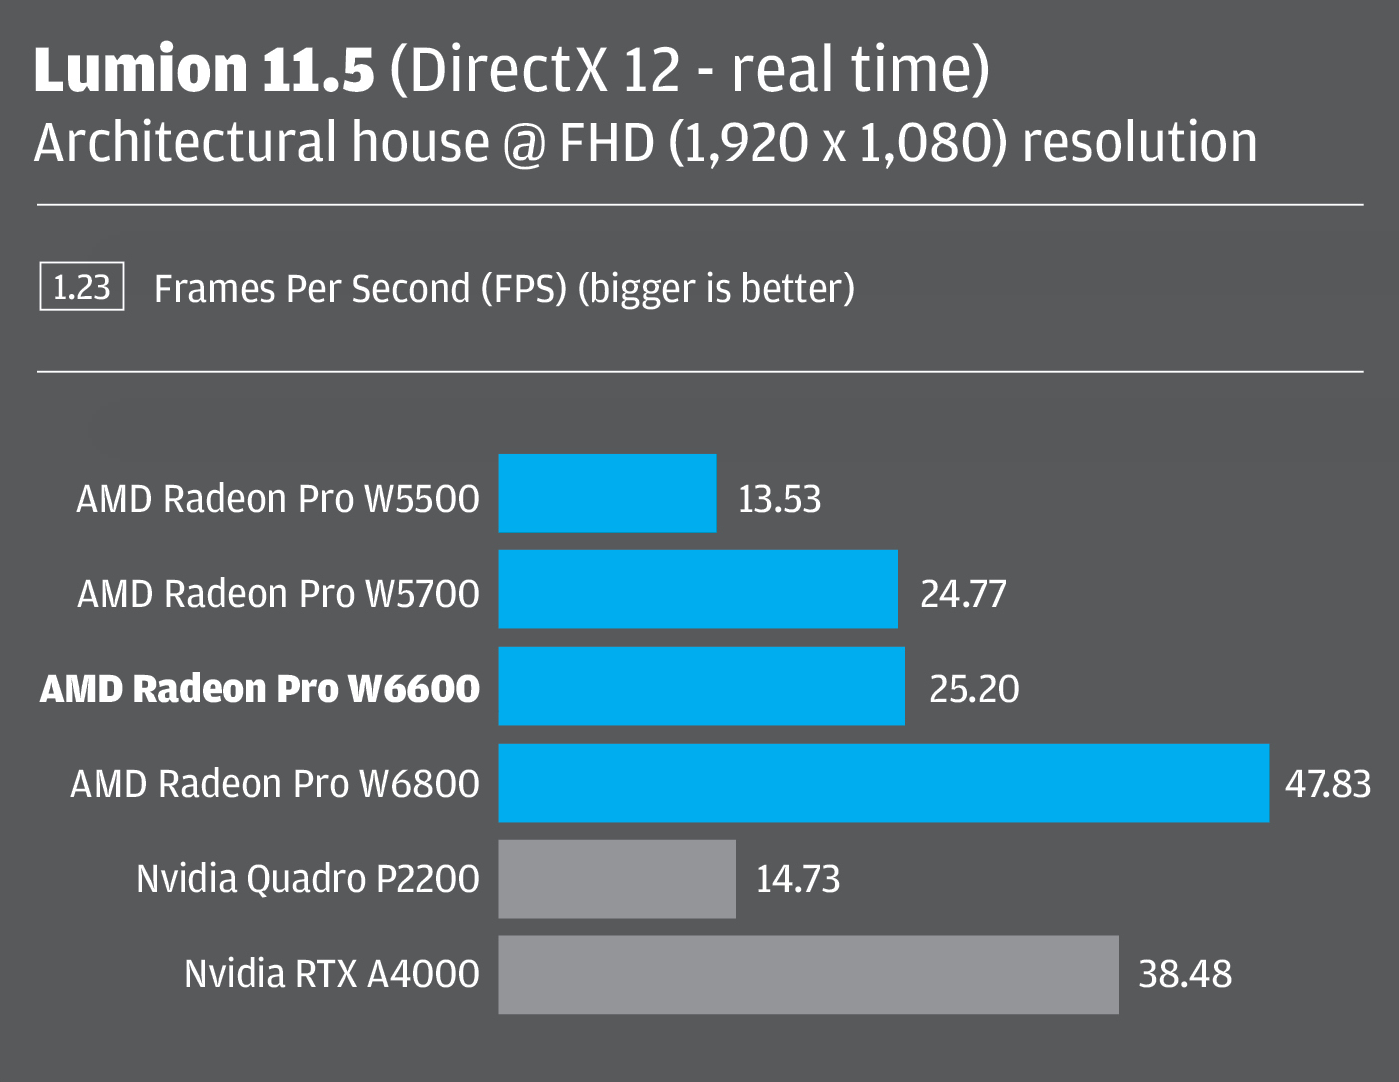 Lumion 11.5 - DirectX 12 - real time - FHD